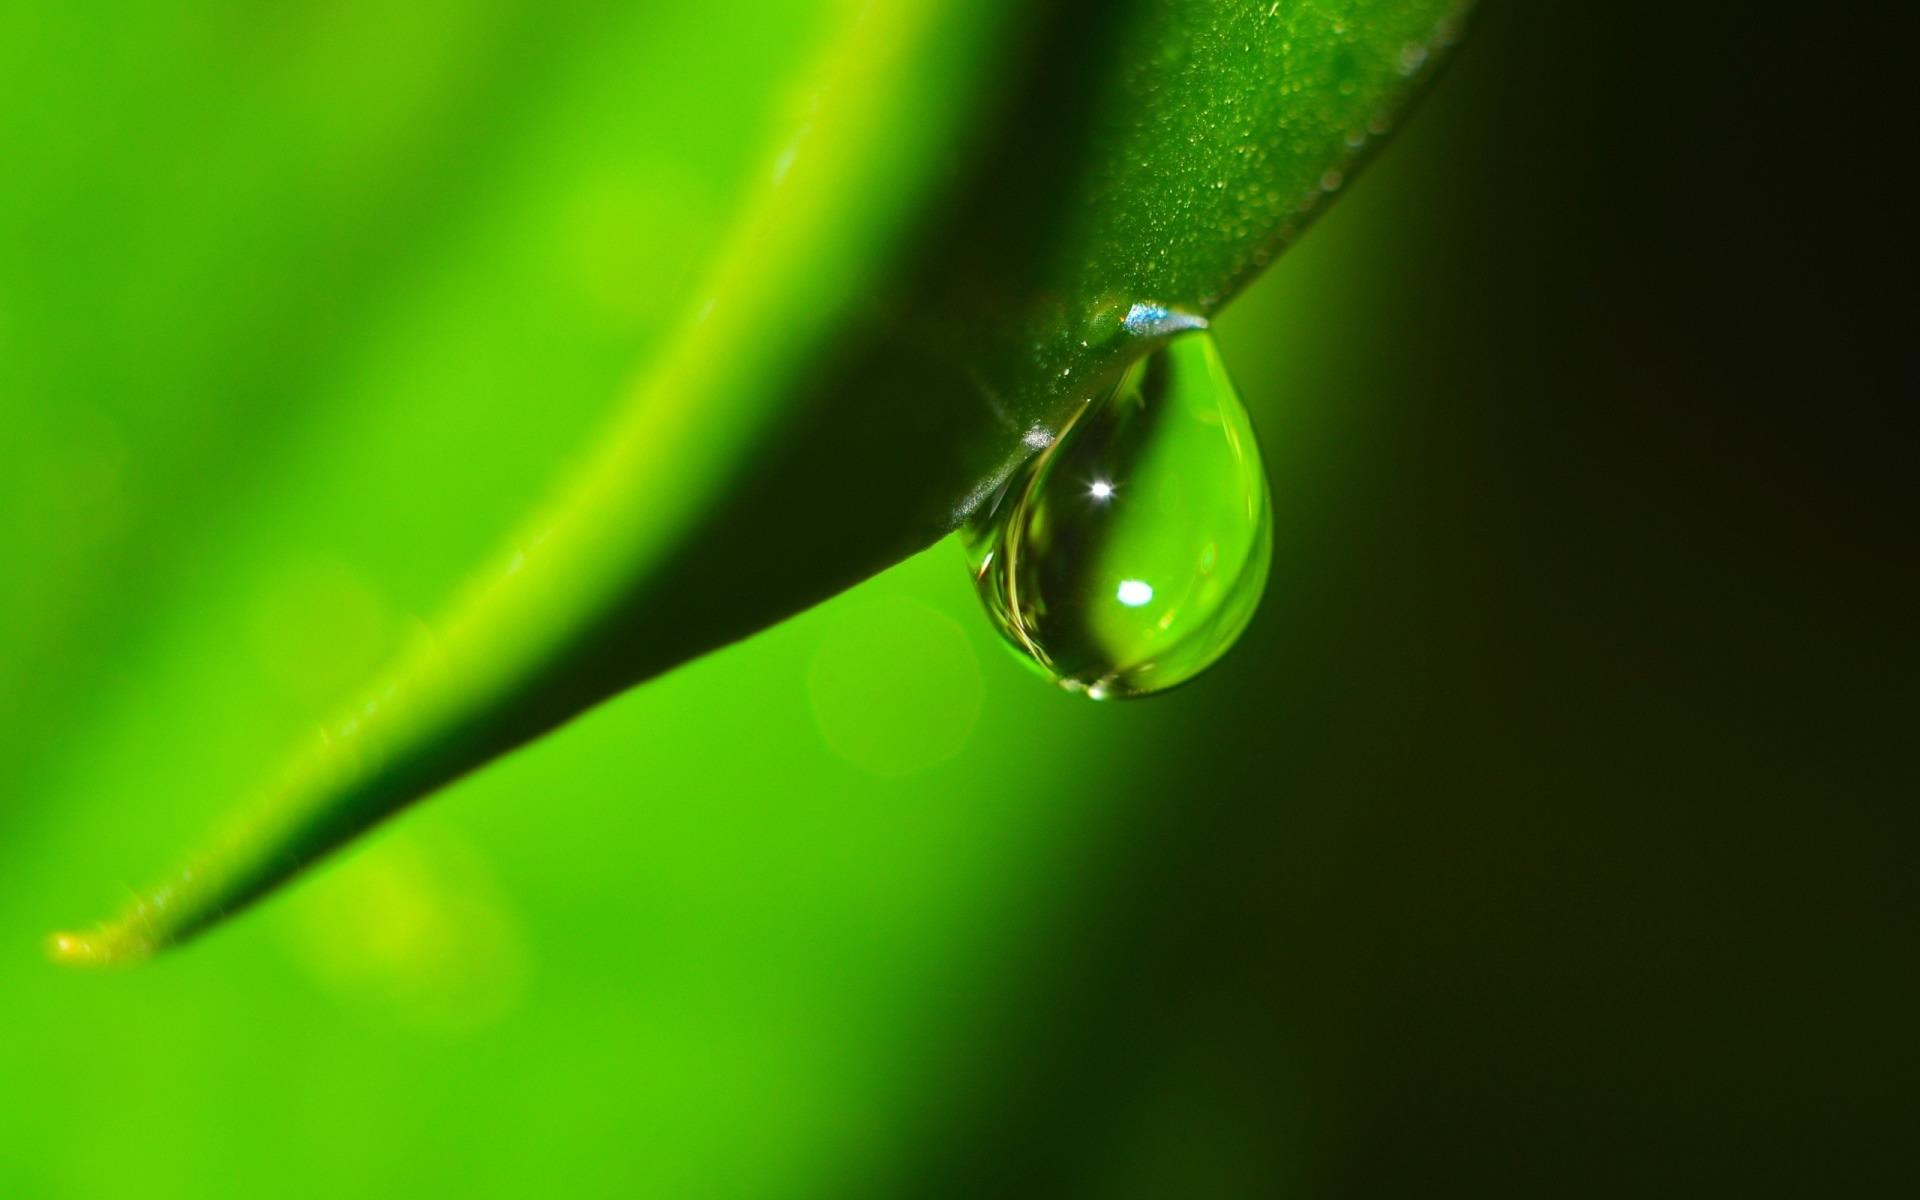 High definition wallpaper image of fresh water droplets on green leaves